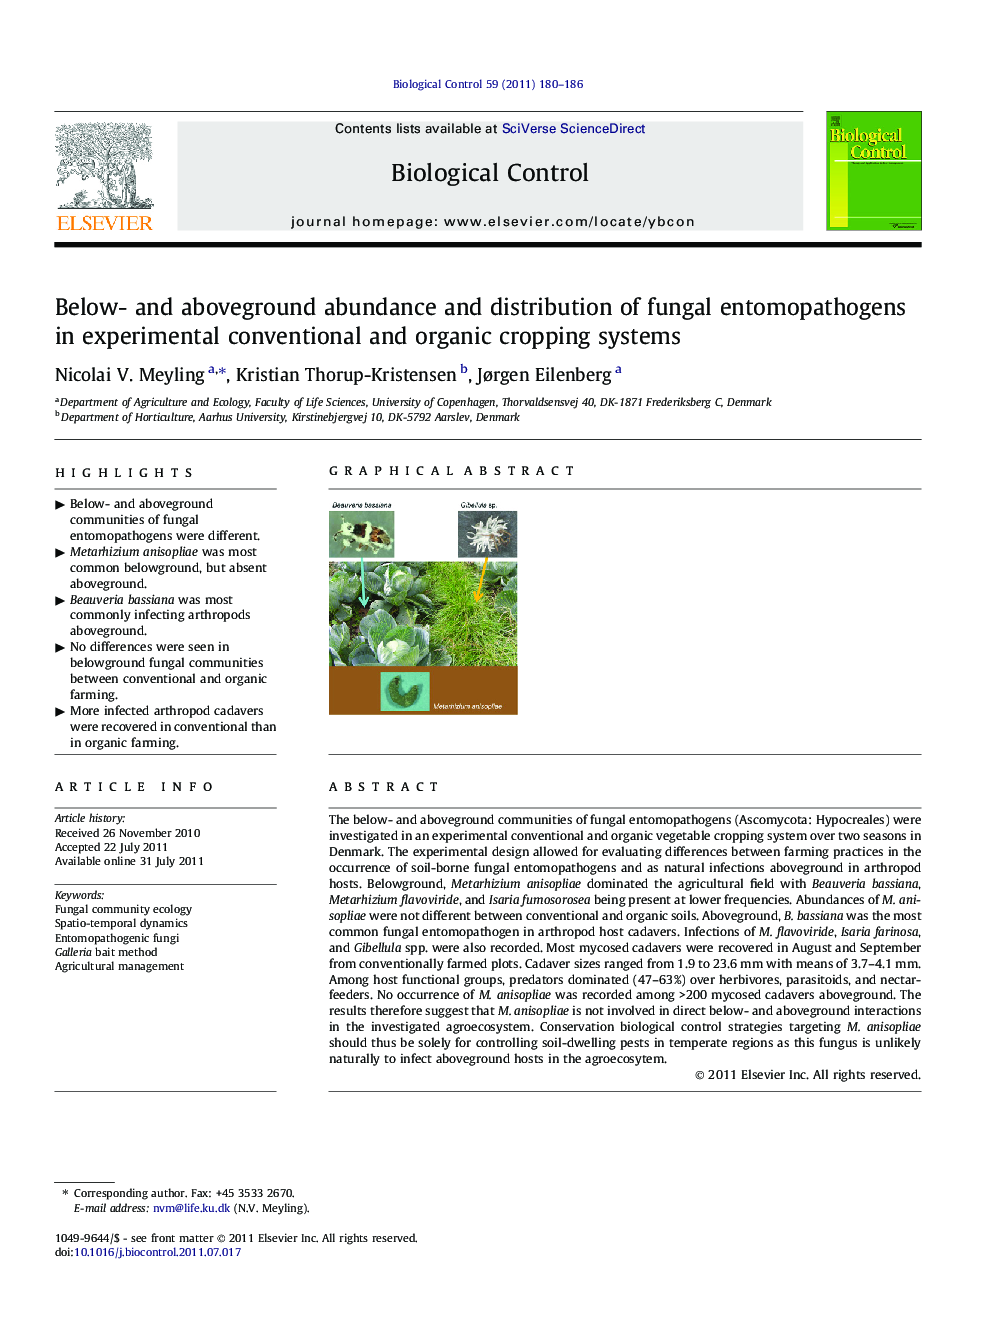 Below- and aboveground abundance and distribution of fungal entomopathogens in experimental conventional and organic cropping systems